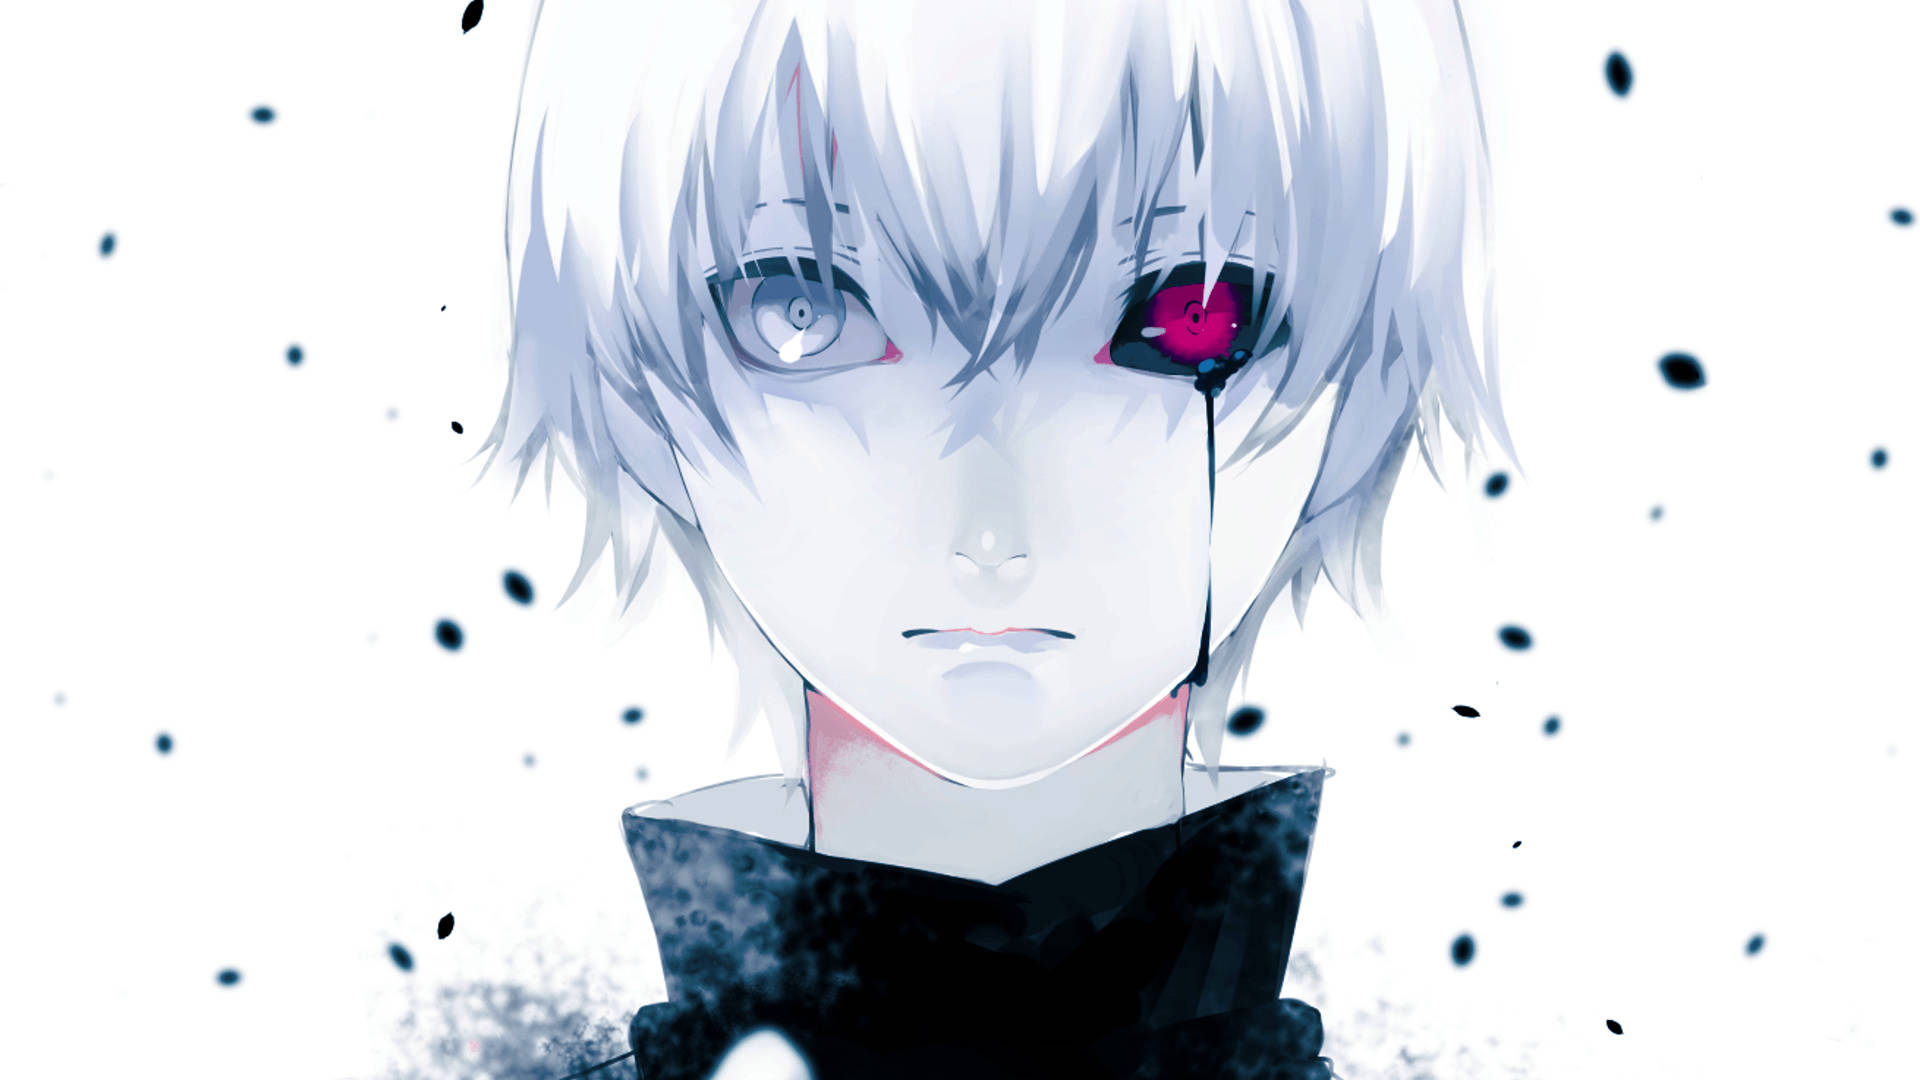 Dramatic Beauty - Anime Character Kaneki In Action Background